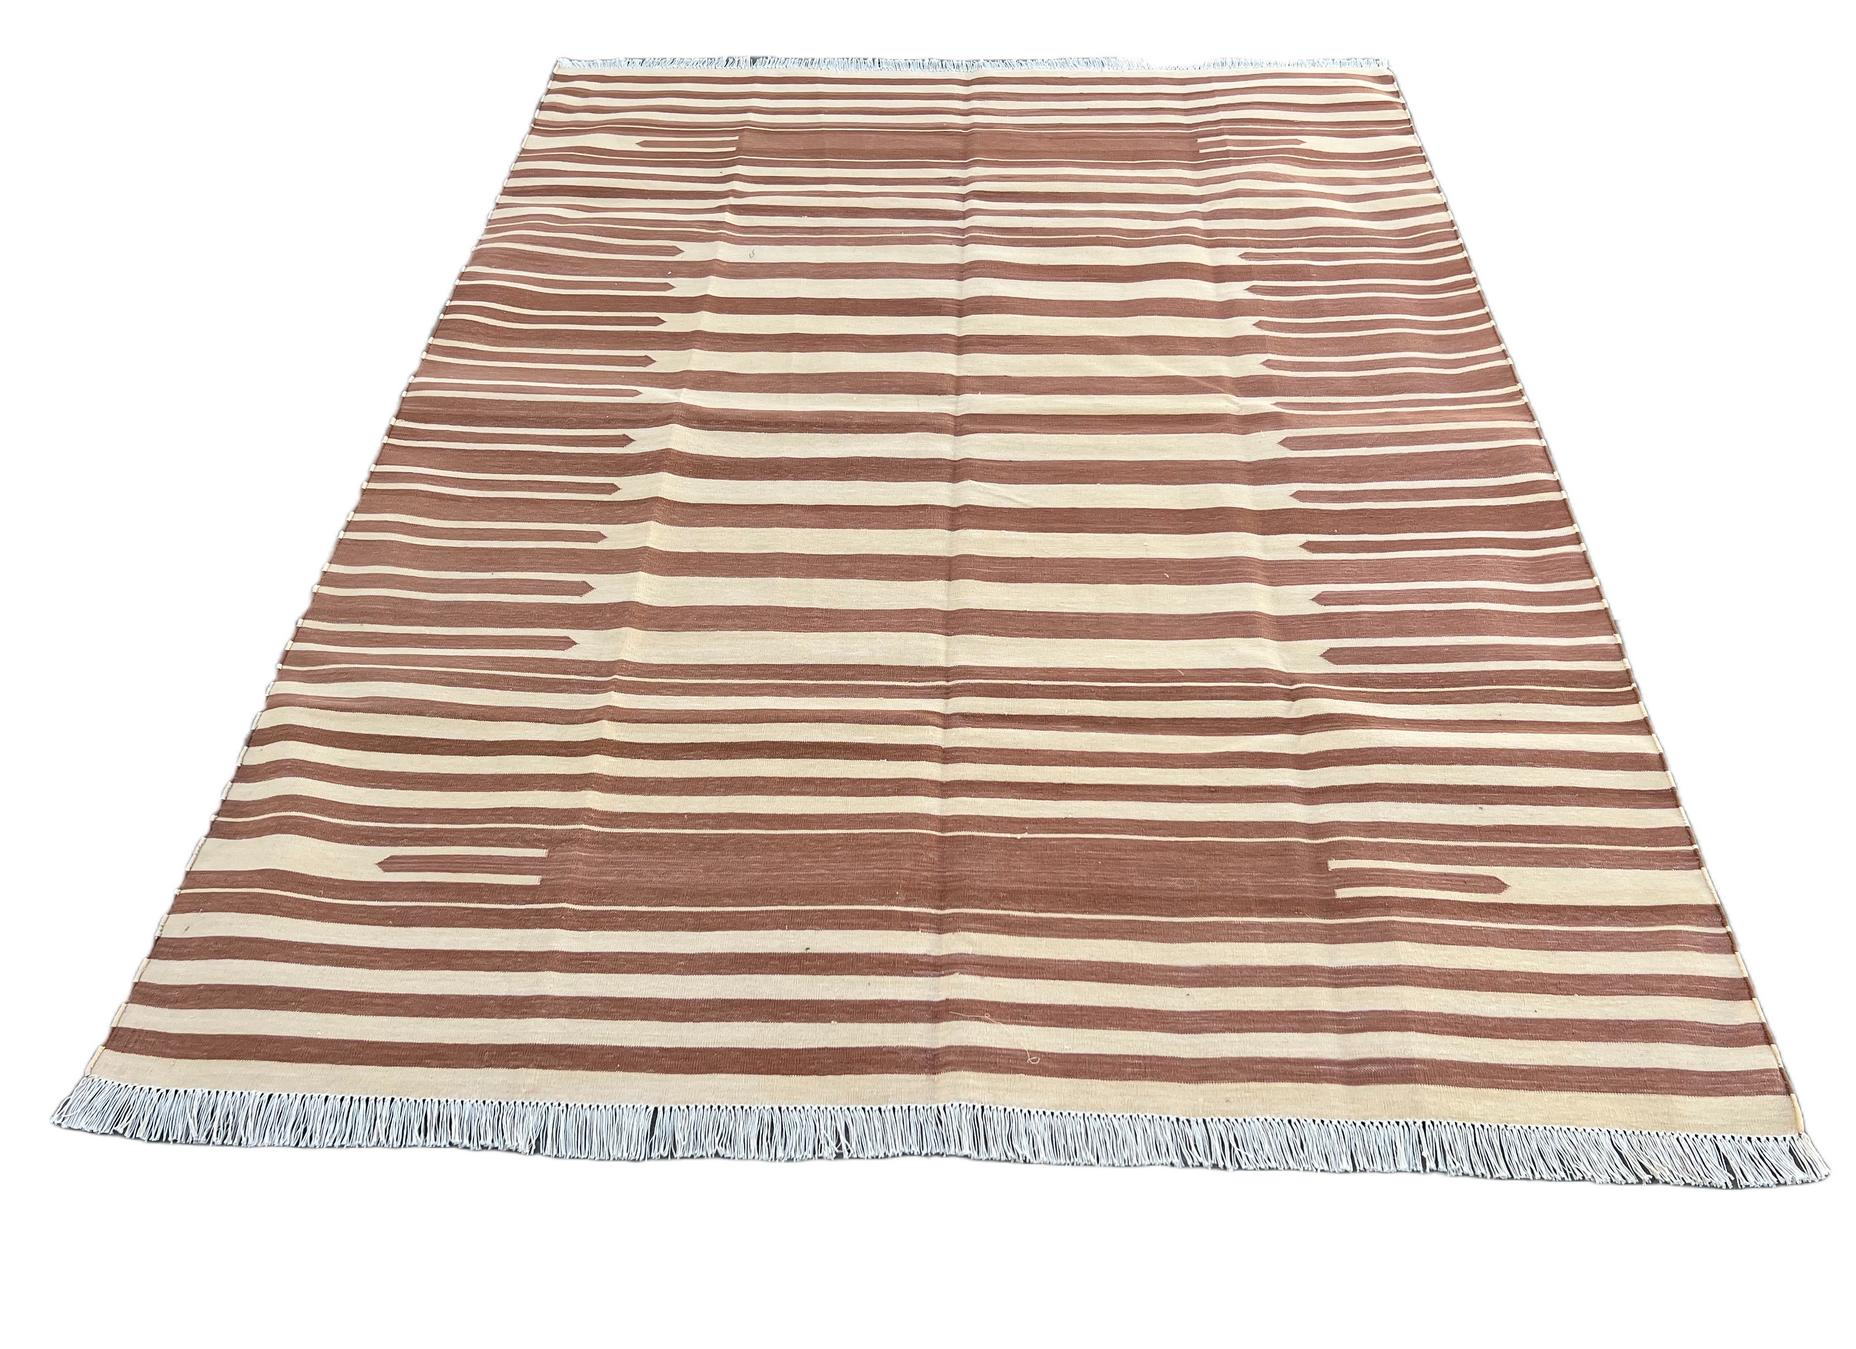 Contemporary Handmade Cotton Area Flat Weave Rug, 5x7 Tan And Cream Striped Indian Dhurrie For Sale